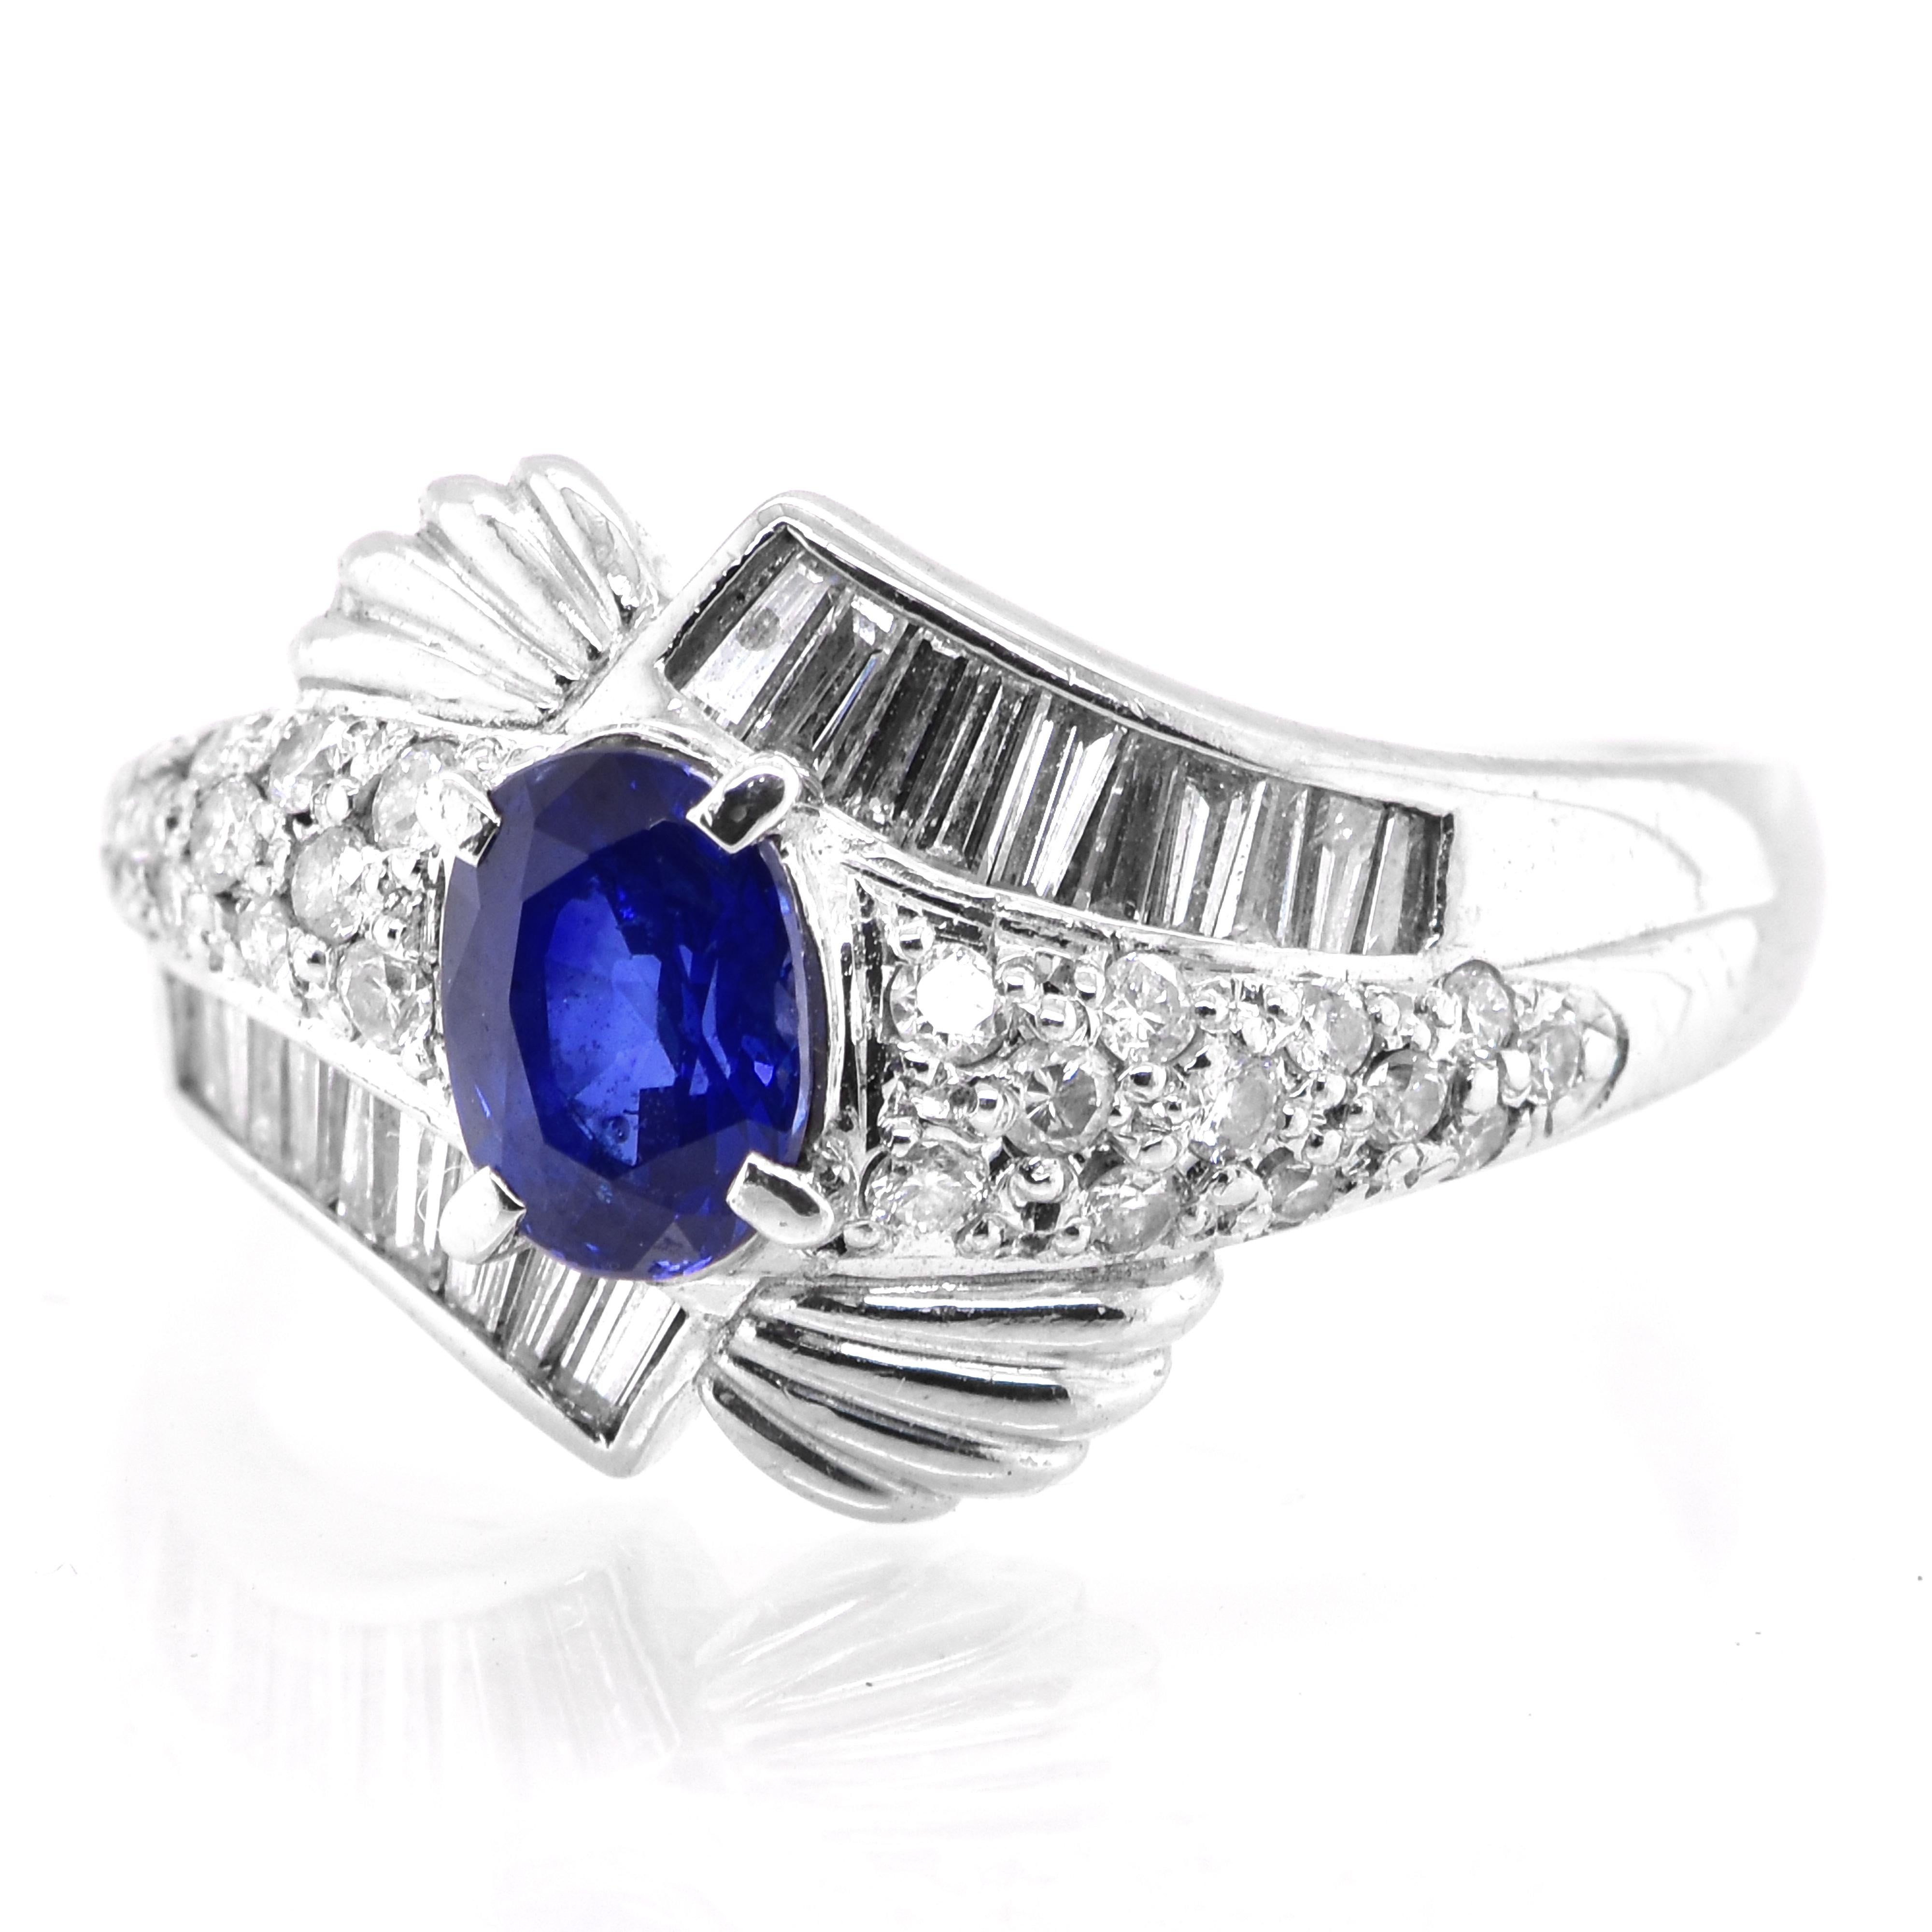 A beautiful ring featuring 1.05 Carat Natural Blue Sapphire and 0.55 Carats Diamond Accents set in Platinum. Sapphires have extraordinary durability - they excel in hardness as well as toughness and durability making them very popular in jewelry.